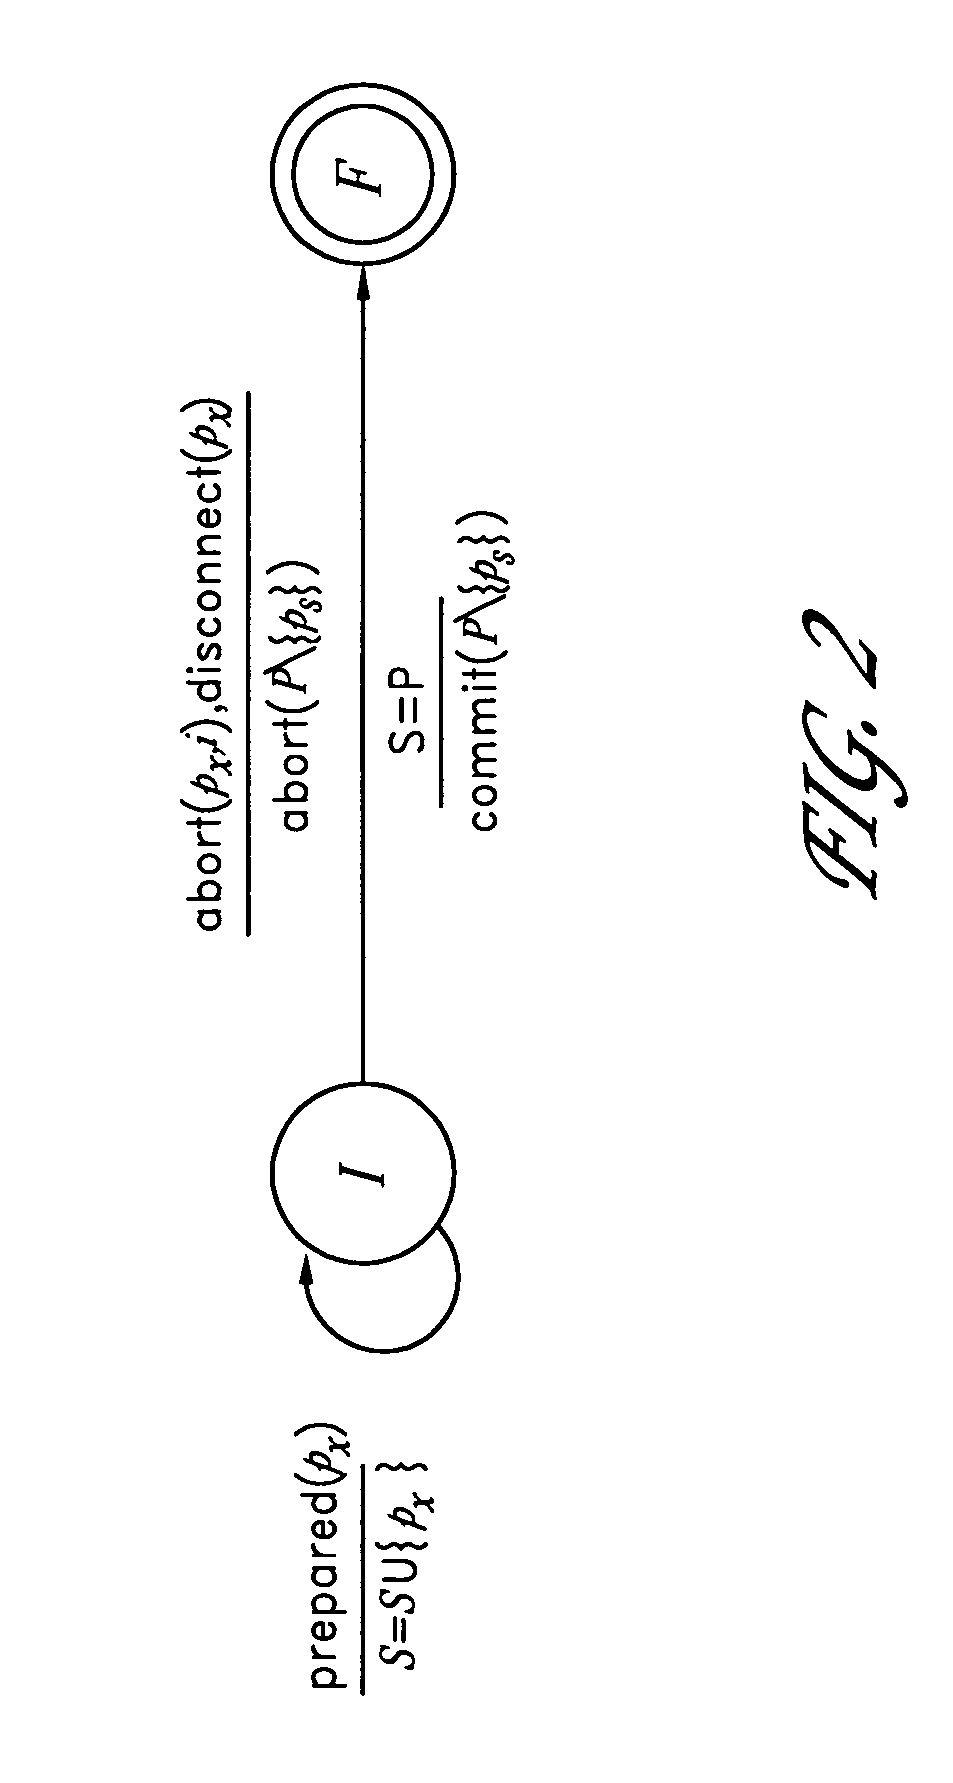 Non-blocking commit protocol systems and methods